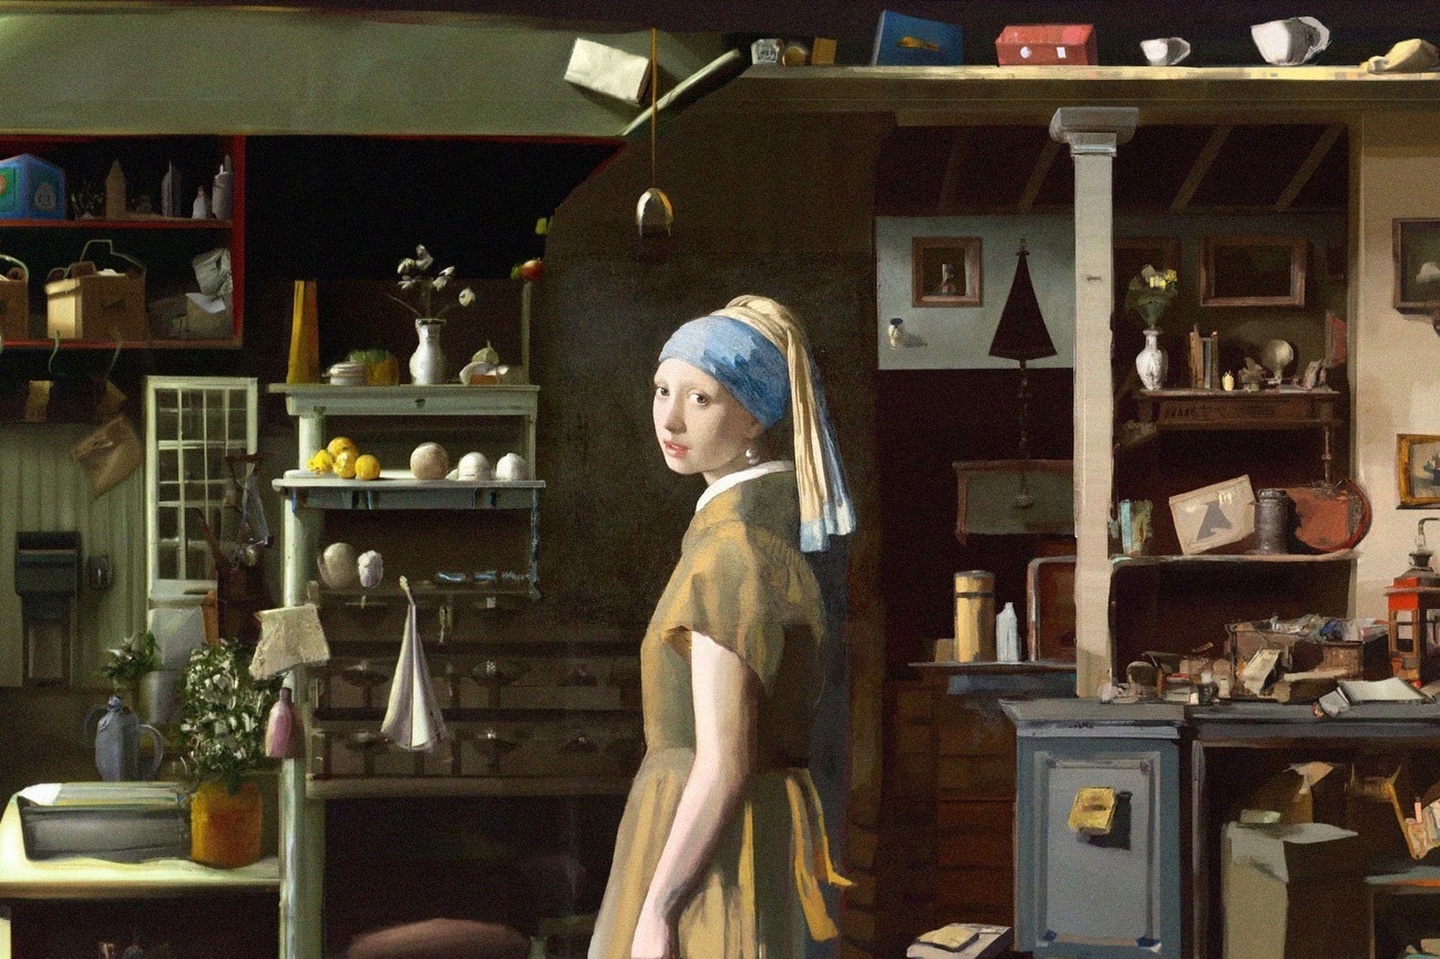 An image showing Johannes Vermeer’s painting Girl with a Pearl Earring, which has been extended beyond its regular borders with the help of OpenAI’s DALL-E tool.